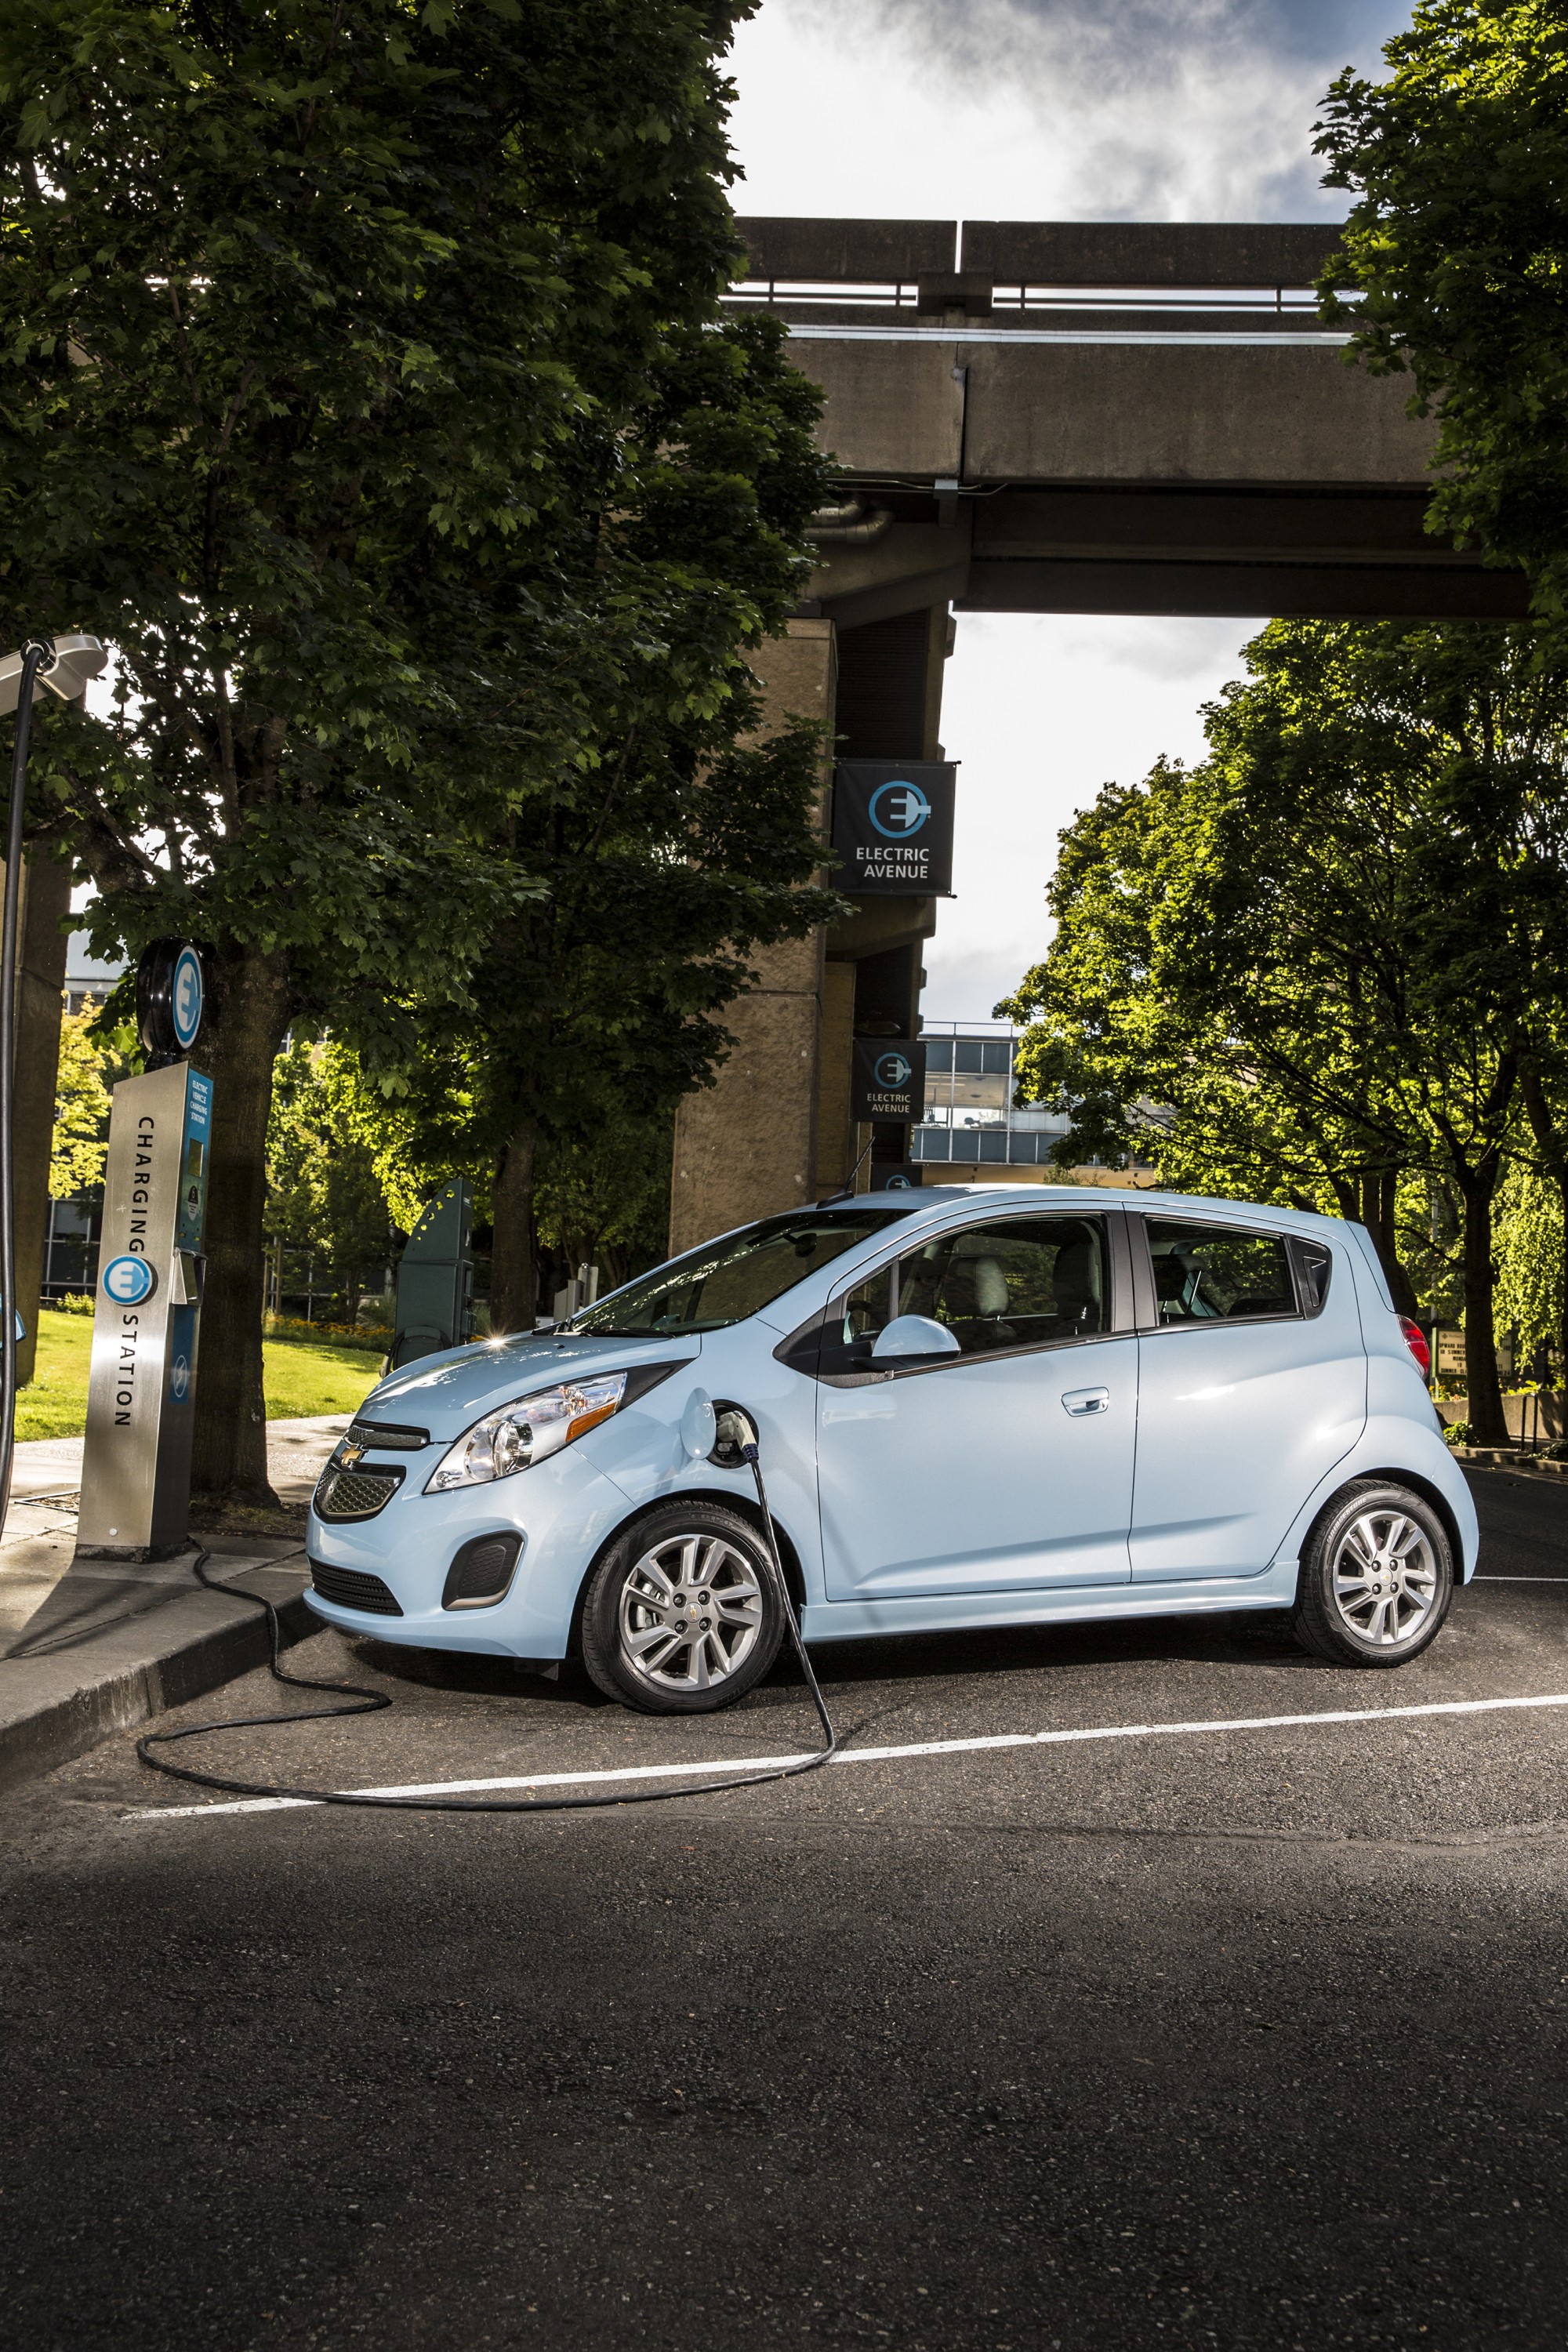 2015 chevrolet spark ev ing to maryland video photo gallery